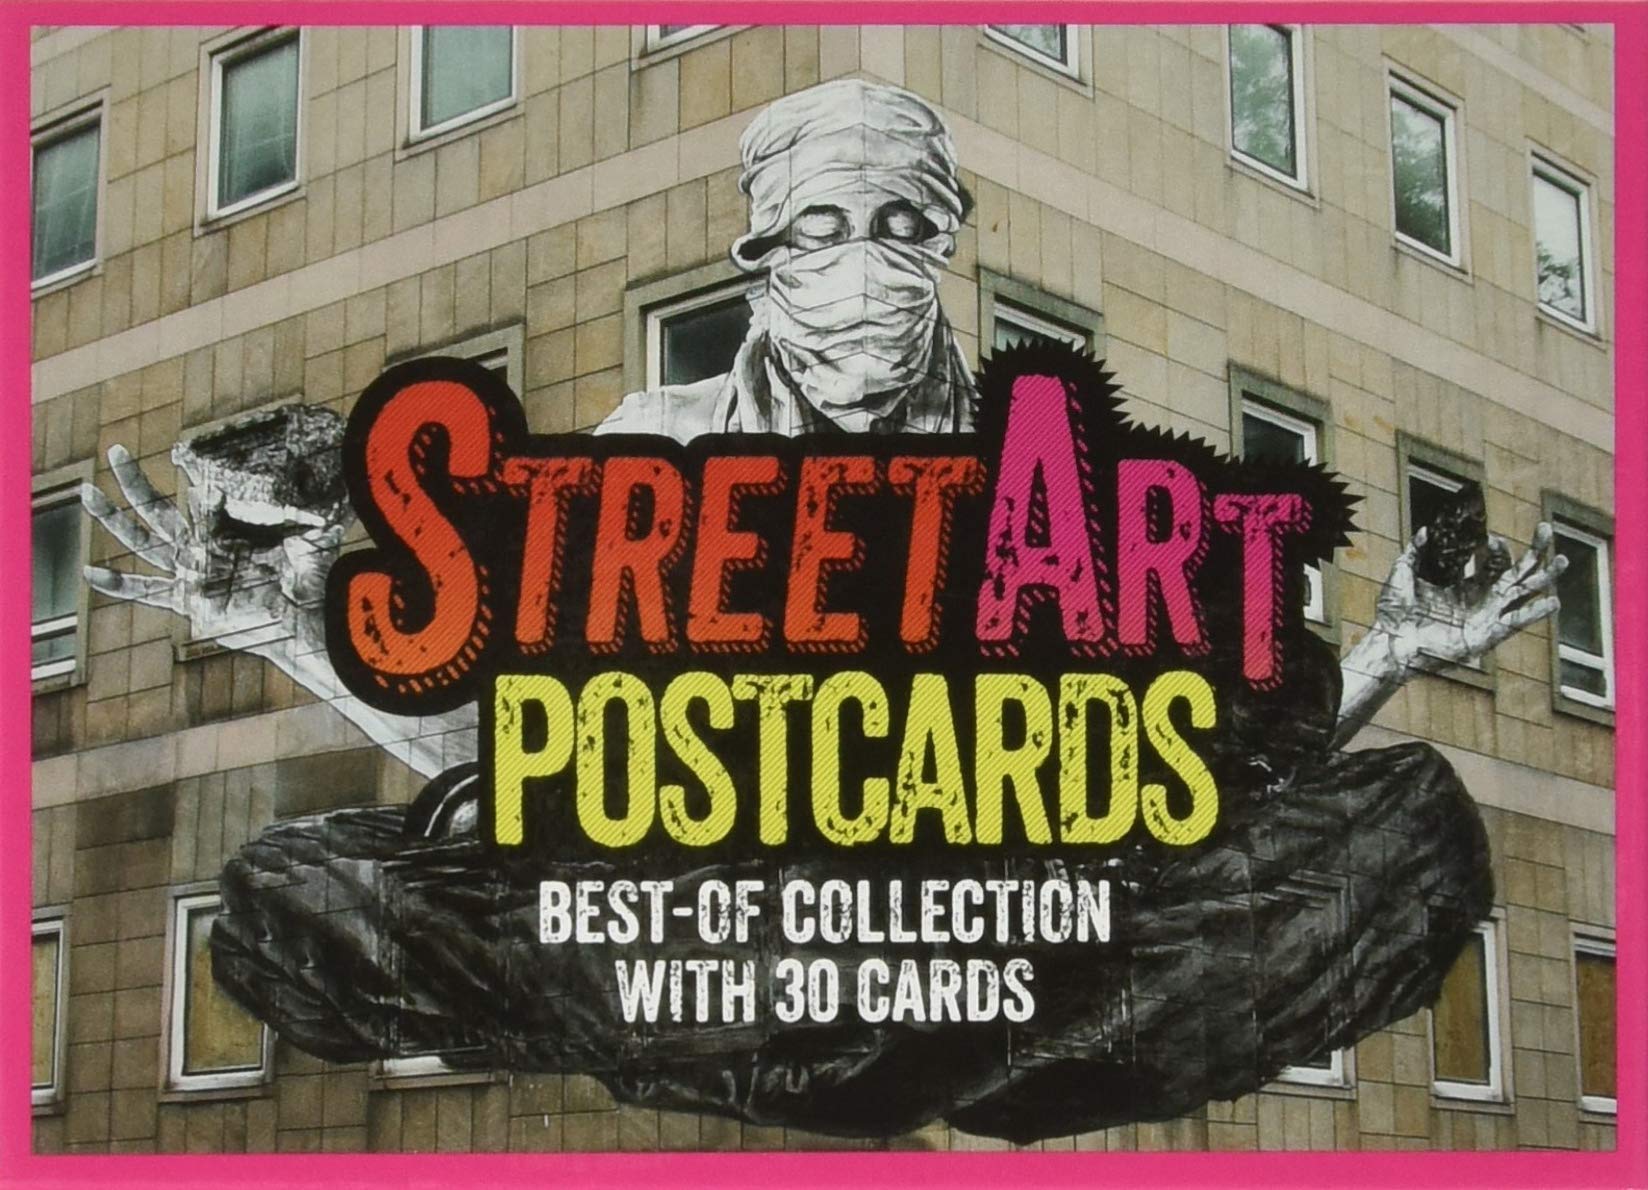 Streetart-Postcards-Best-of-Collection-with-30-Cards